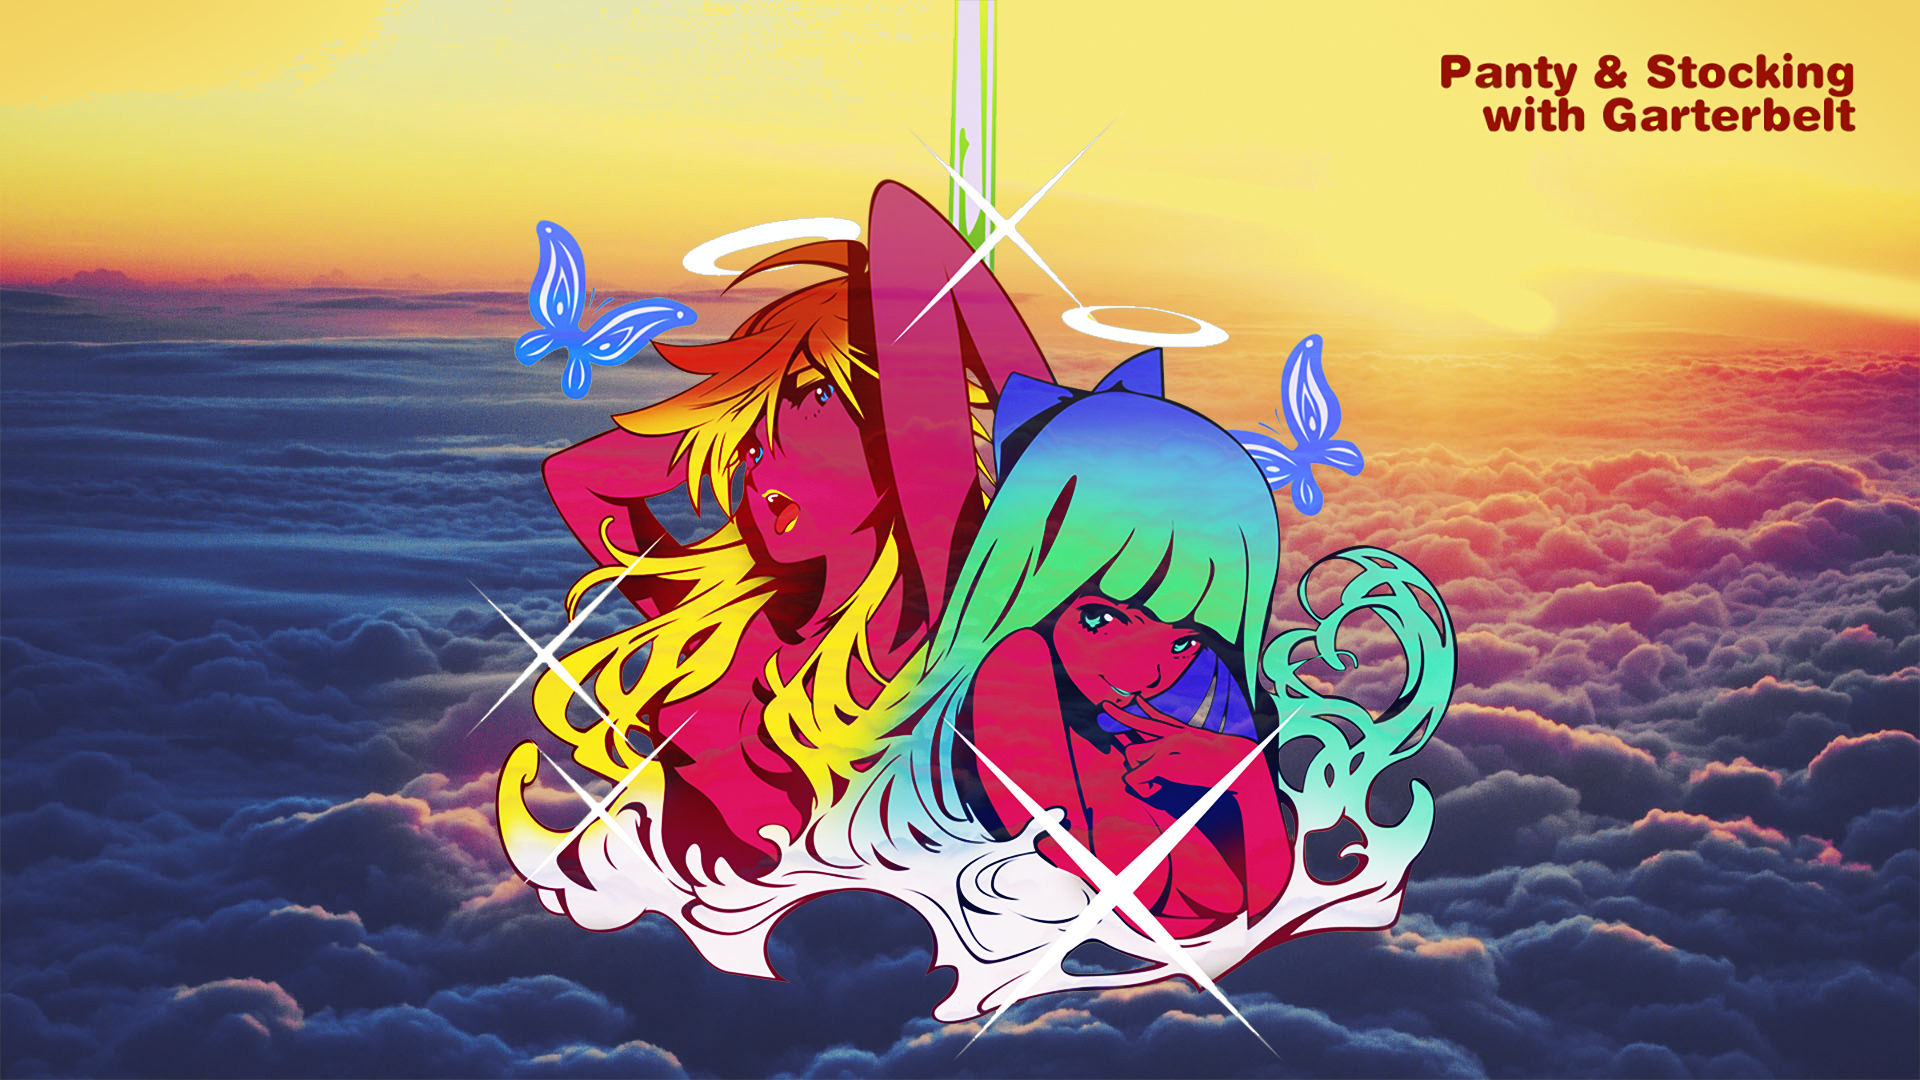 Panty And Stocking With Garterbelt Album Covers Anarchy Panty Anarchy Stocking 1920x1080